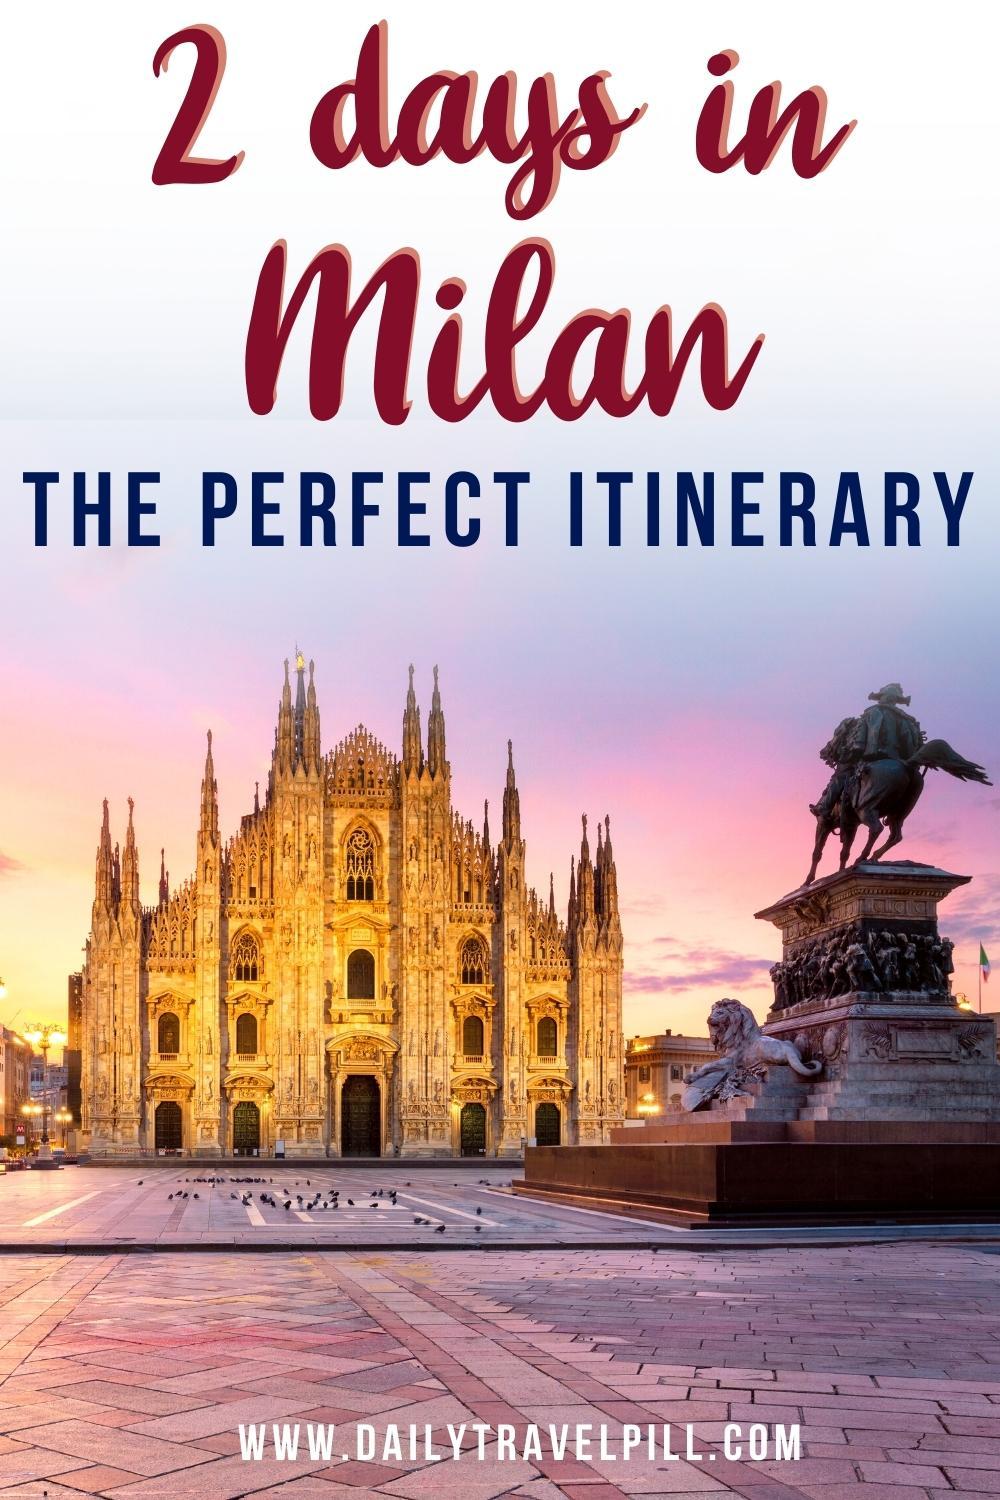 2 days in milan, two day milan itinerary, how to spend two days in Milan, weekend in milan